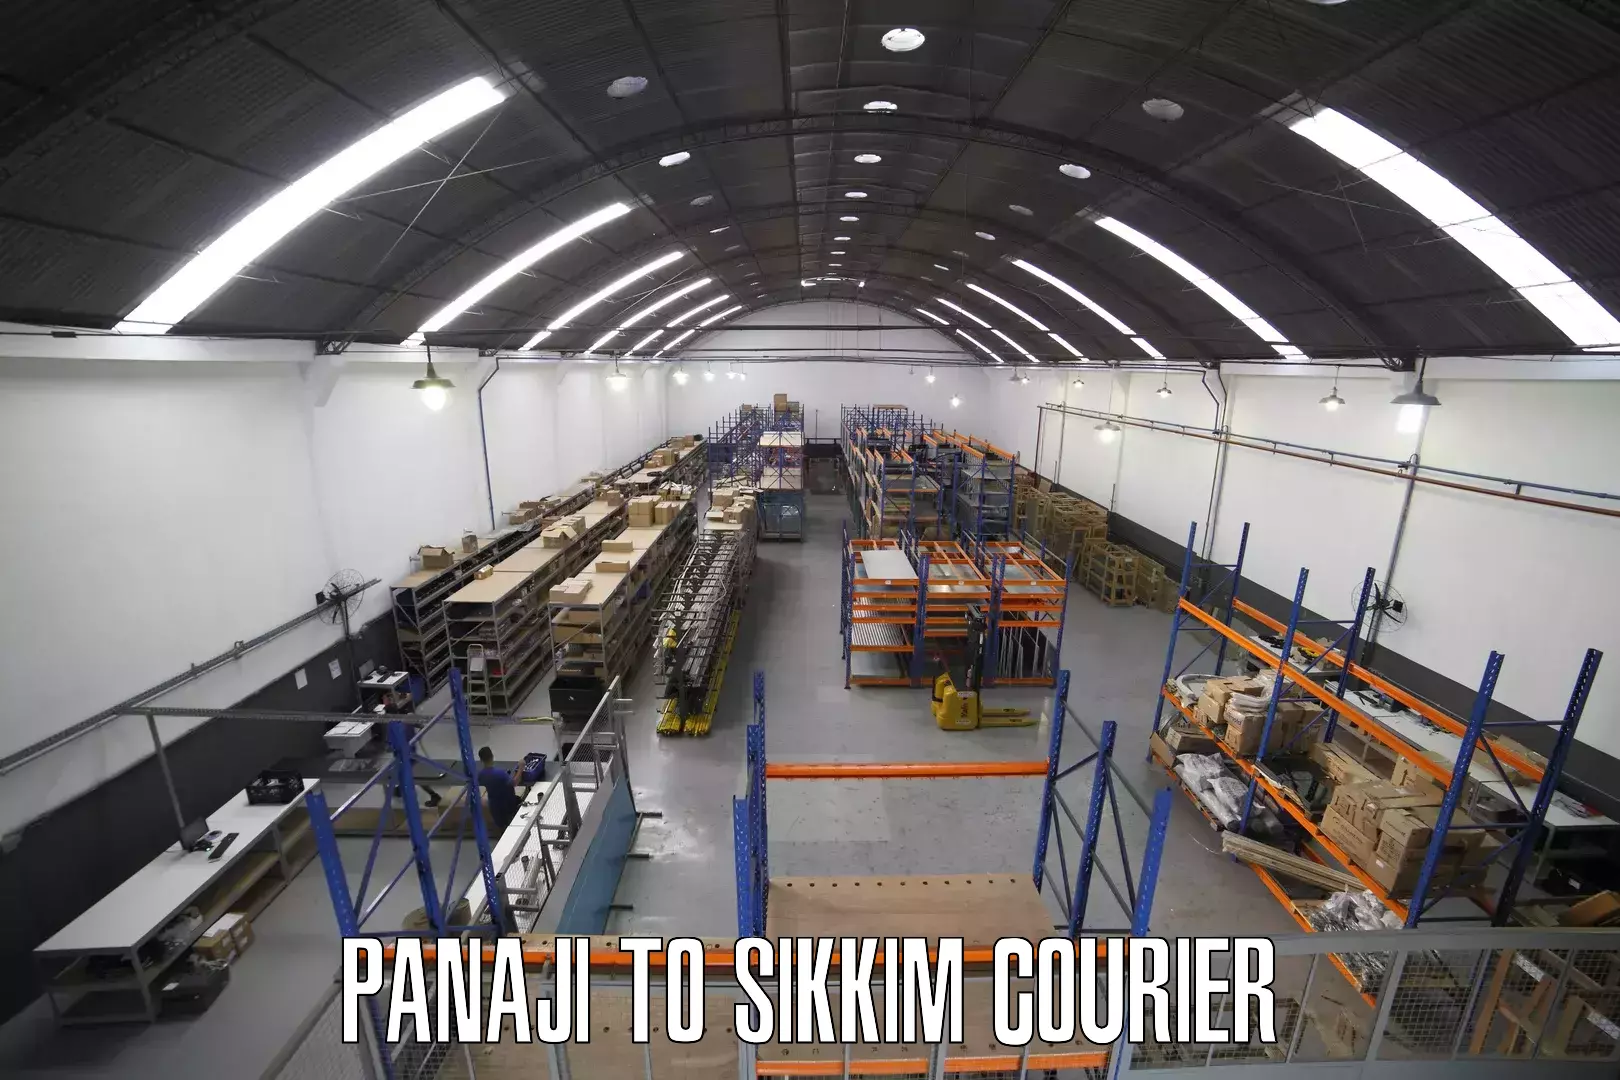 International courier networks Panaji to Pelling